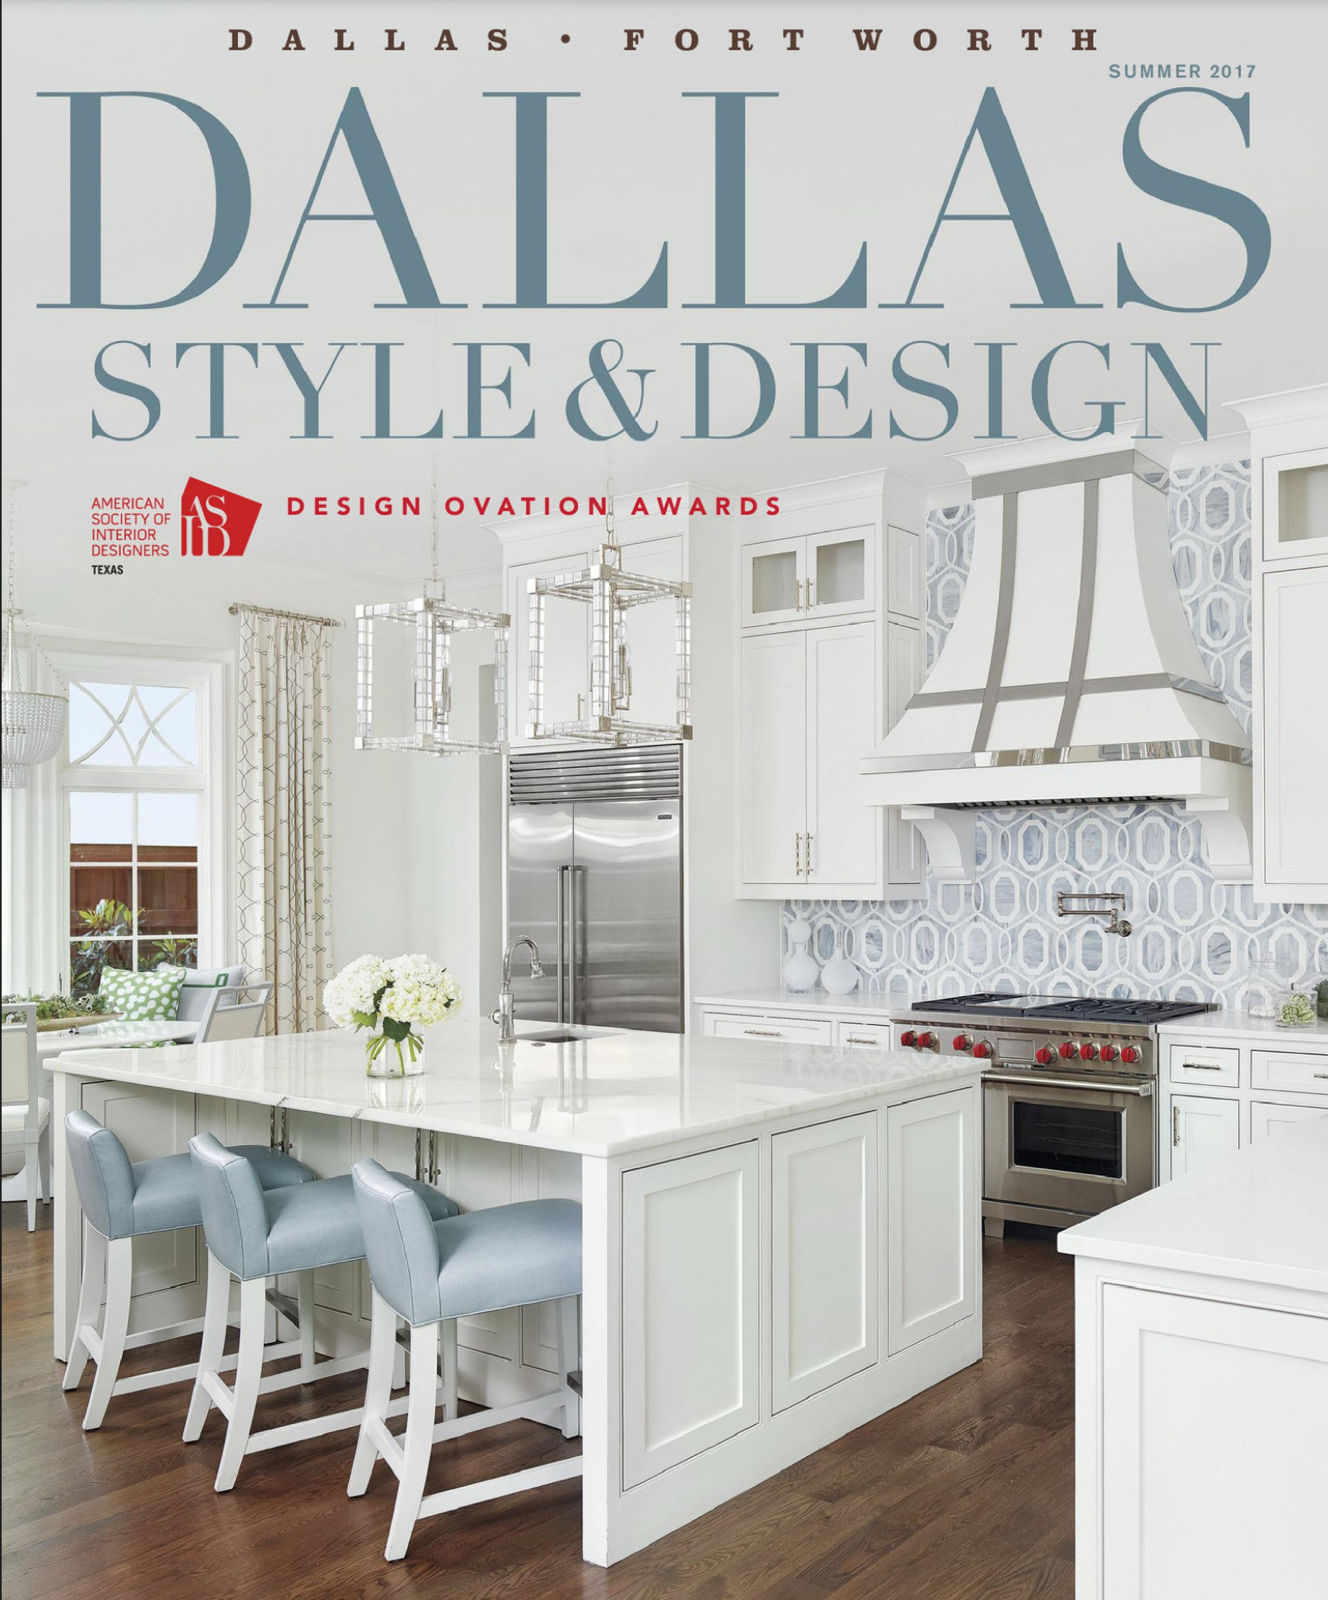 Tci Featured On The Cover Of Dallas Style And Design Traci